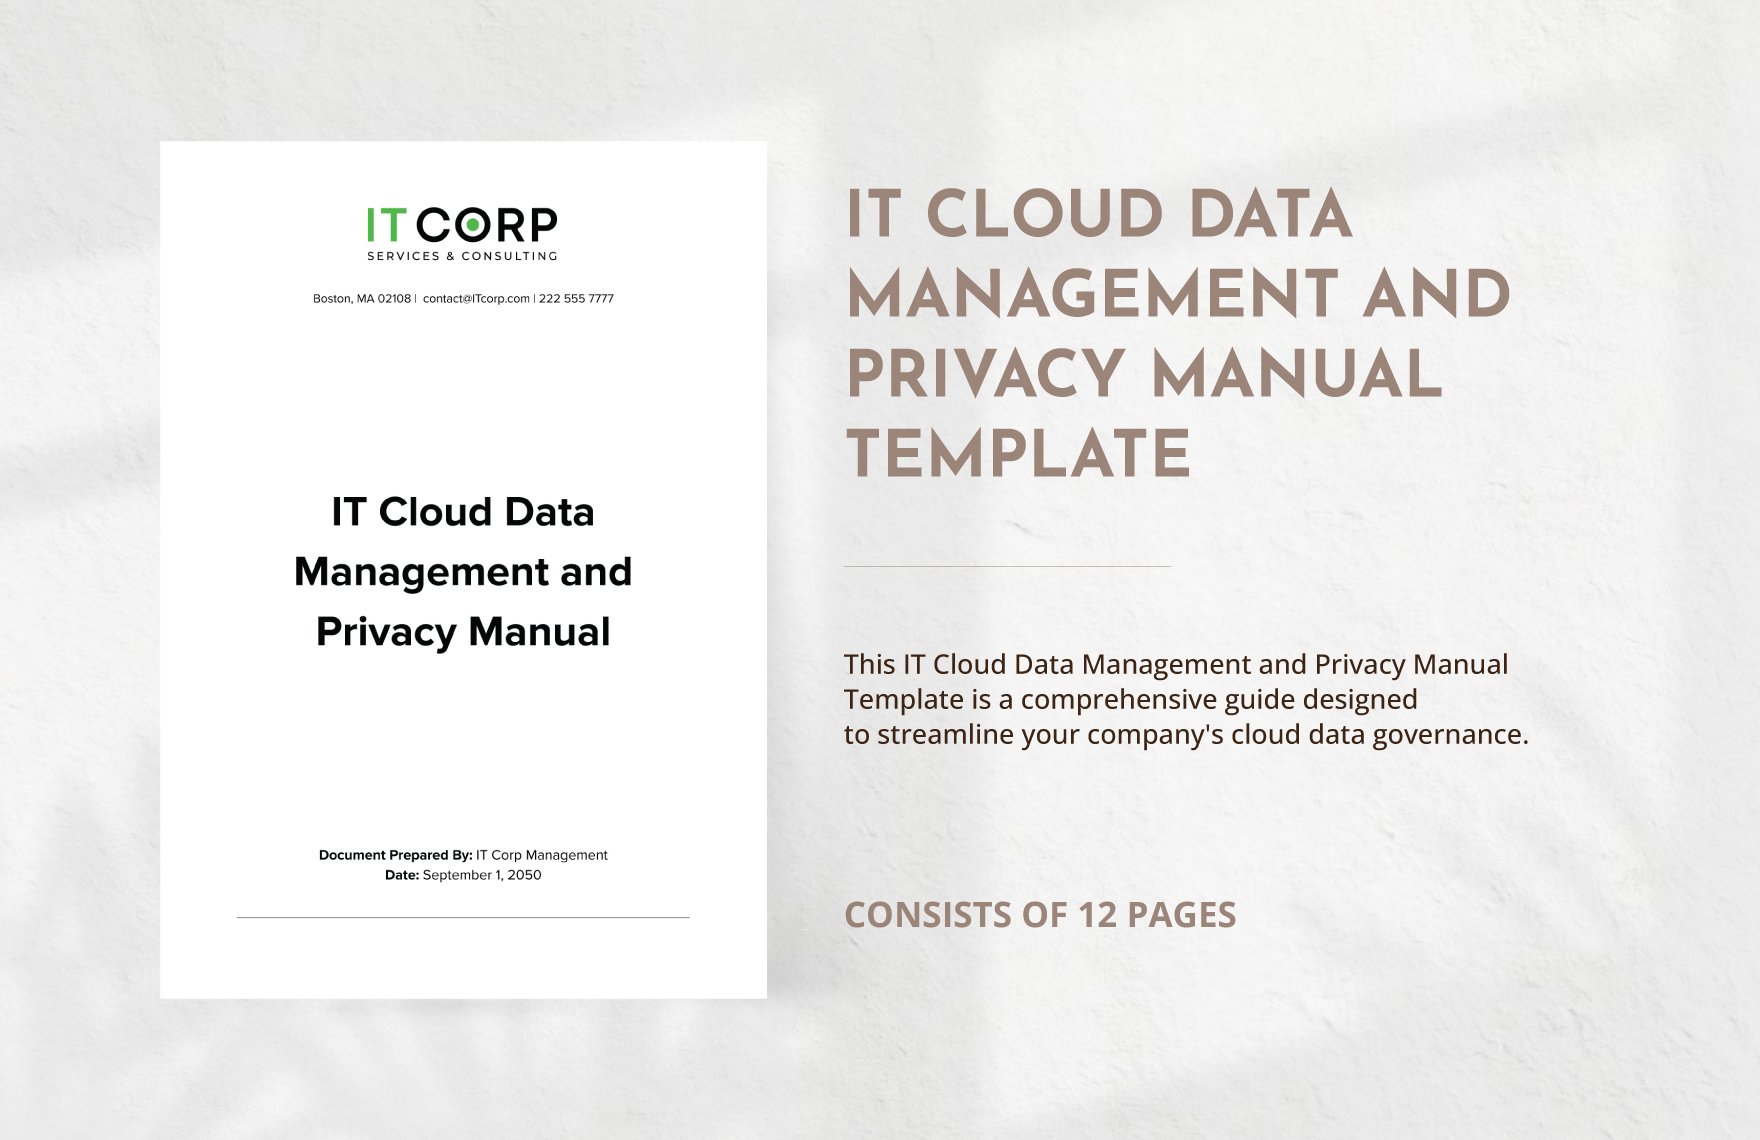 IT Cloud Data Management and Privacy Manual Template